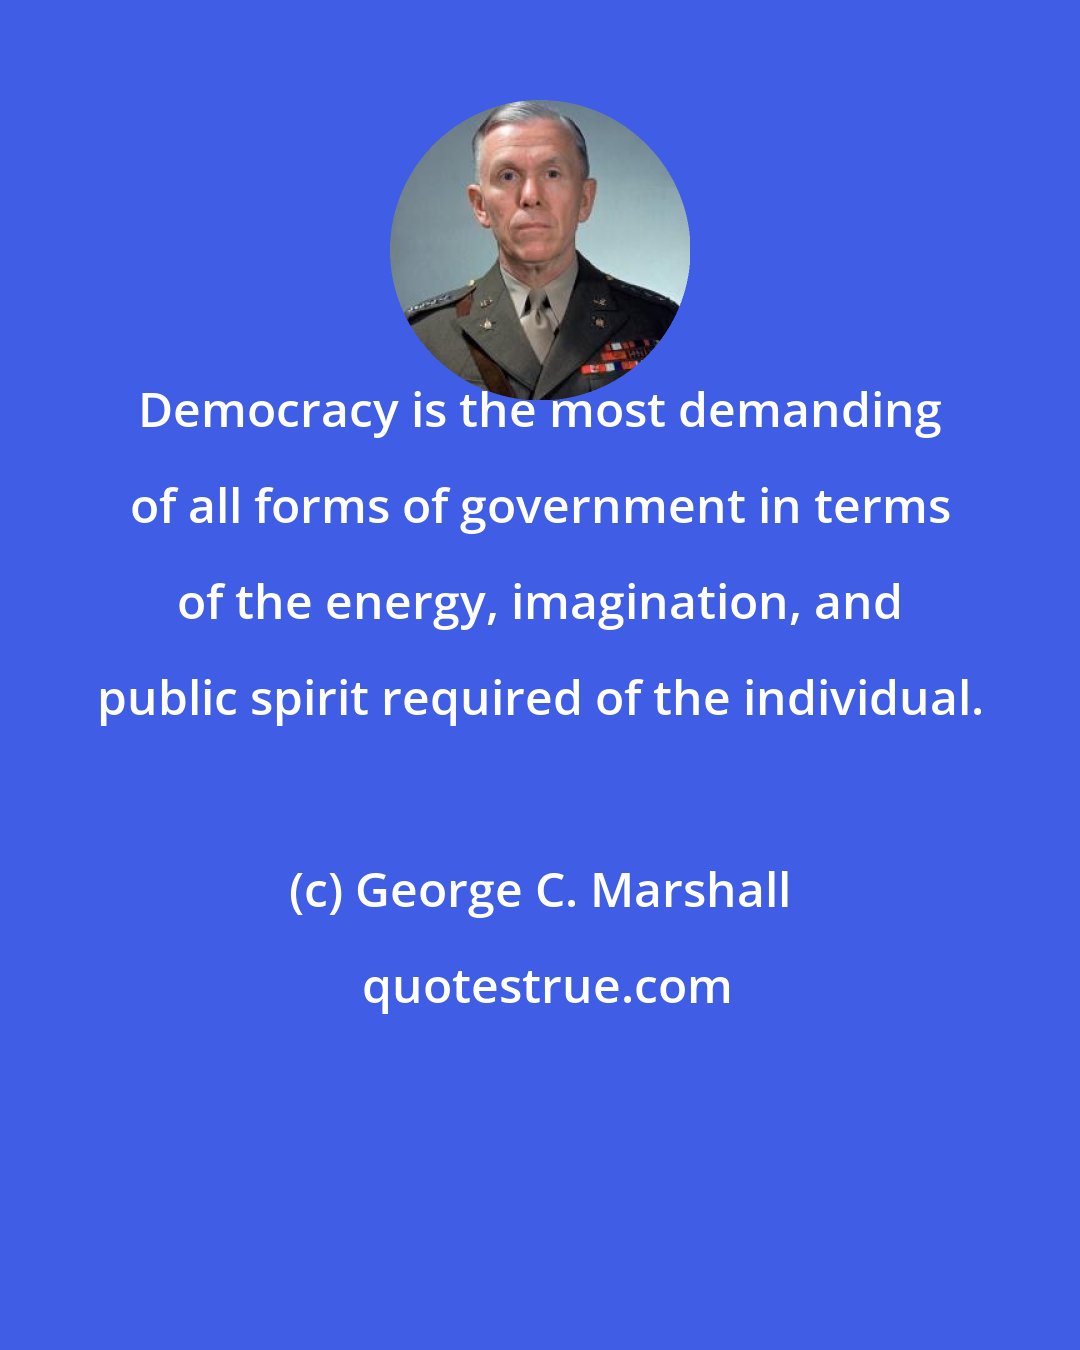 George C. Marshall: Democracy is the most demanding of all forms of government in terms of the energy, imagination, and public spirit required of the individual.